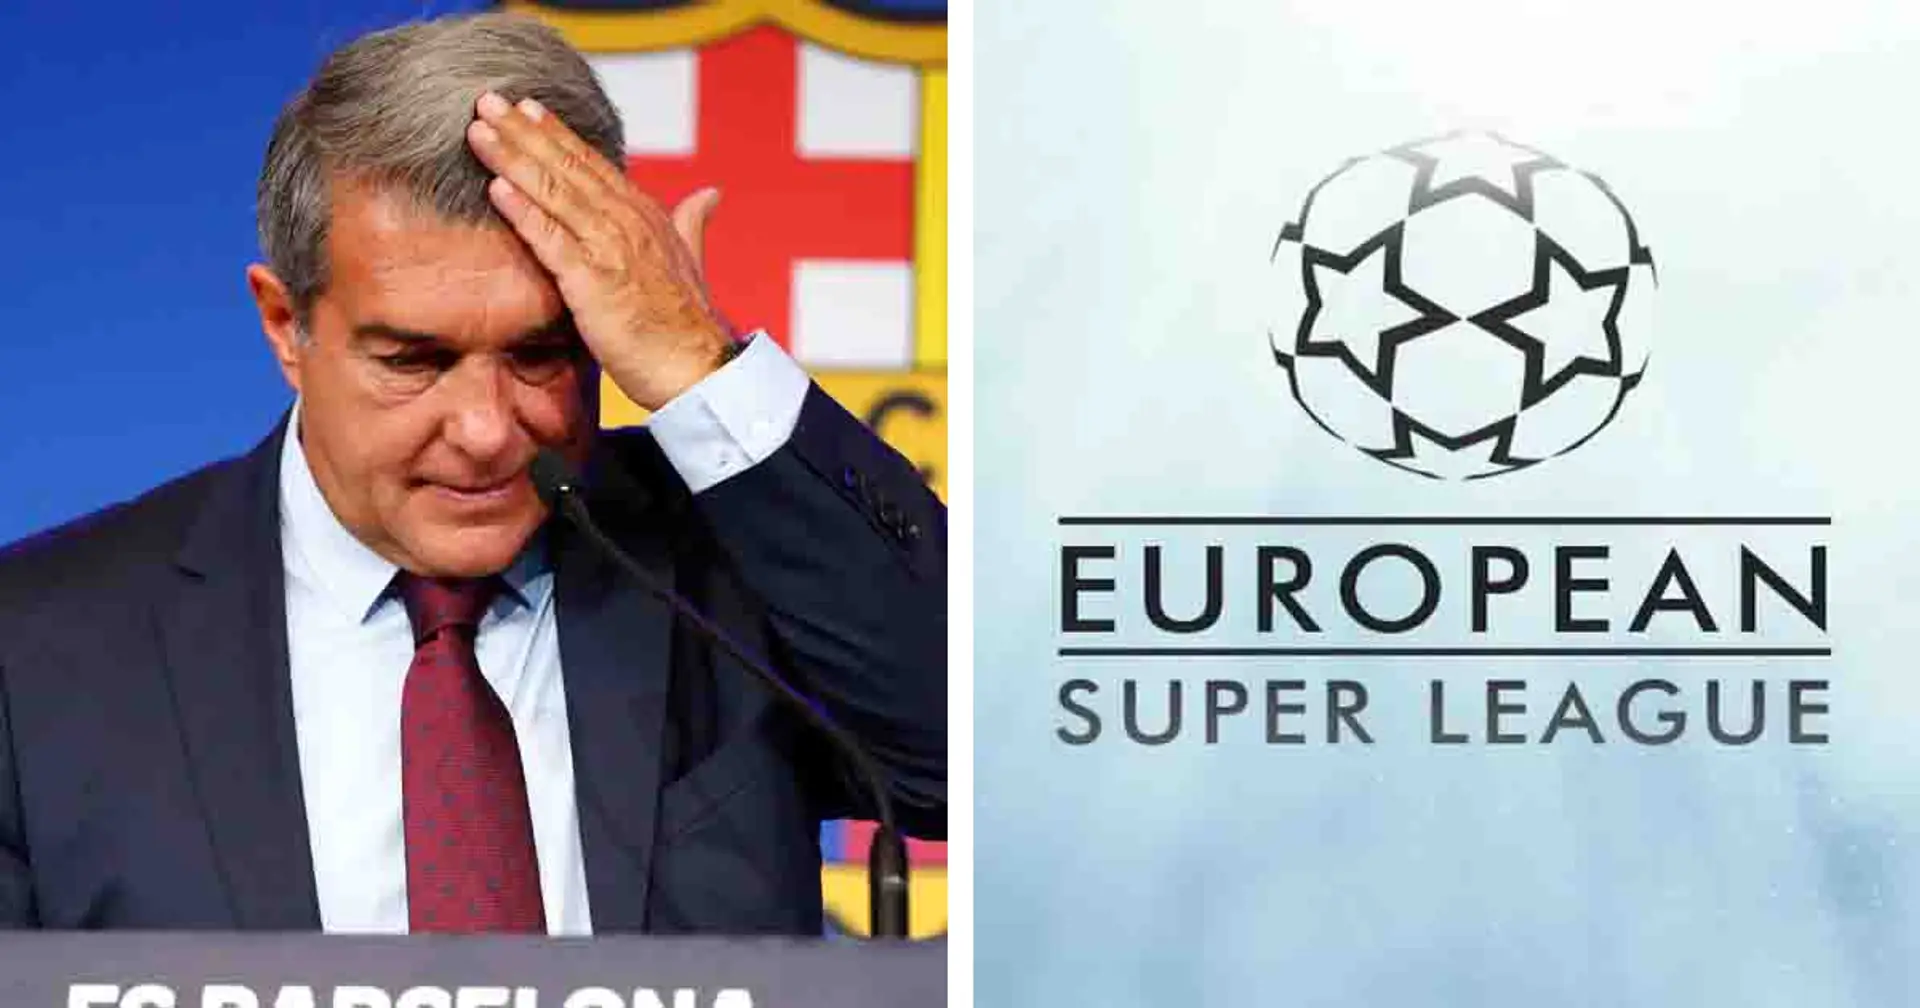 Revealed: how much Barca will be fined if they decide to leave Super League project